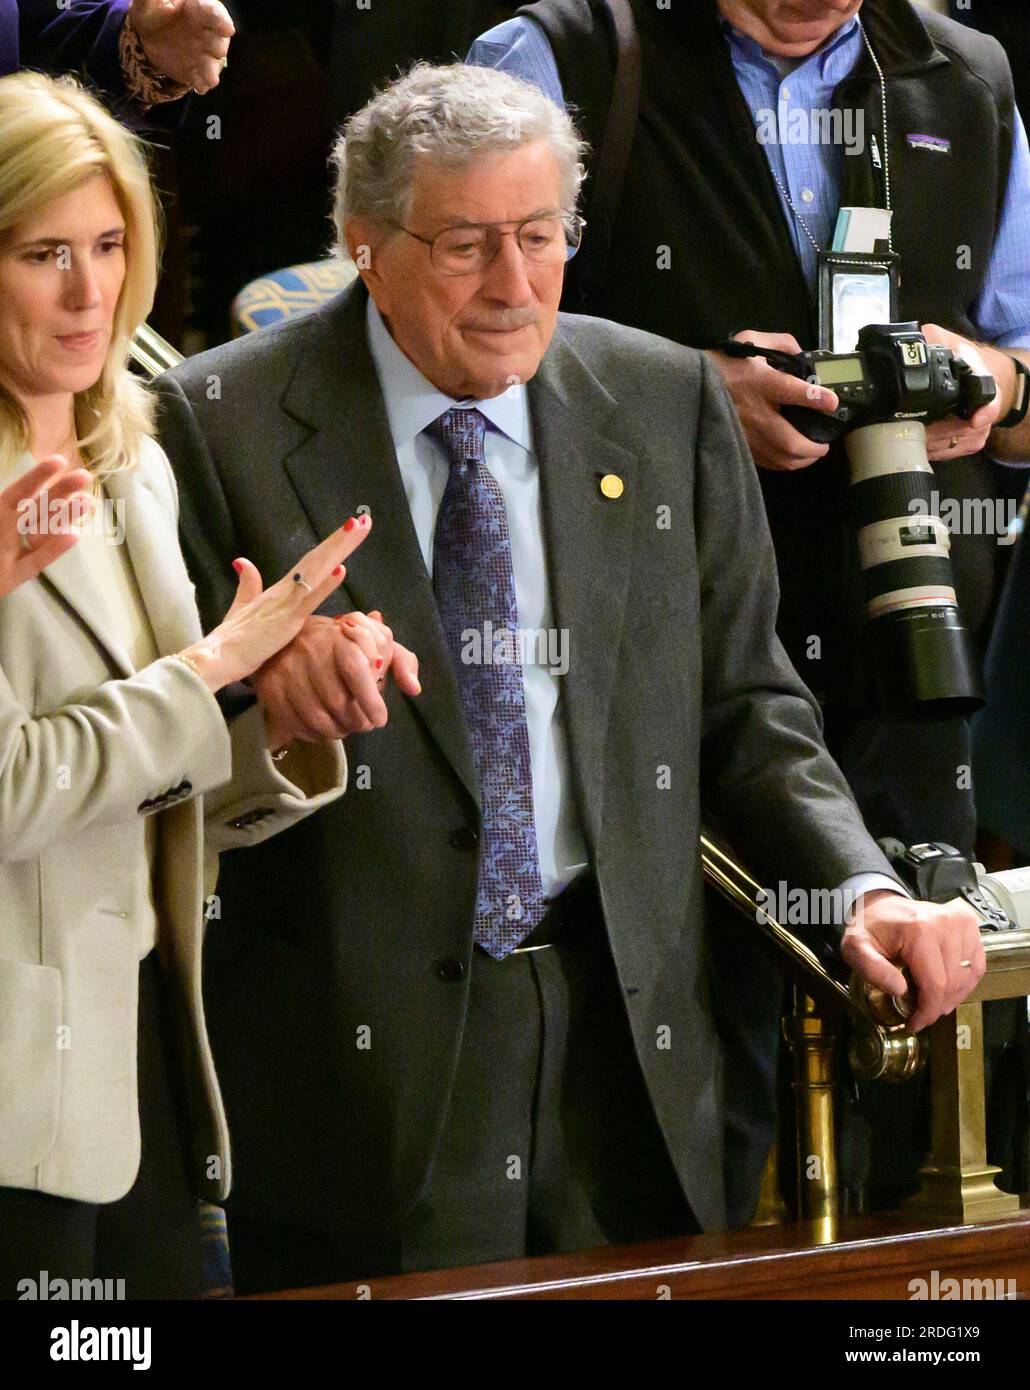 Washington, United States Of America. 03rd Jan, 2019. Singer Tony Bennett, a guest of Speaker of the United States House of Representatives Nancy Pelosi (Democrat of California), stands in the gallery as the 116th Congress convenes for its opening session in the US House Chamber of the US Capitol in Washington, DC on Thursday, January 3, 2019.Credit: Ron Sachs/CNP/Sipa USA (RESTRICTION: NO New York or New Jersey Newspapers or newspapers within a 75 mile radius of New York City) Credit: Sipa USA/Alamy Live News Stock Photo